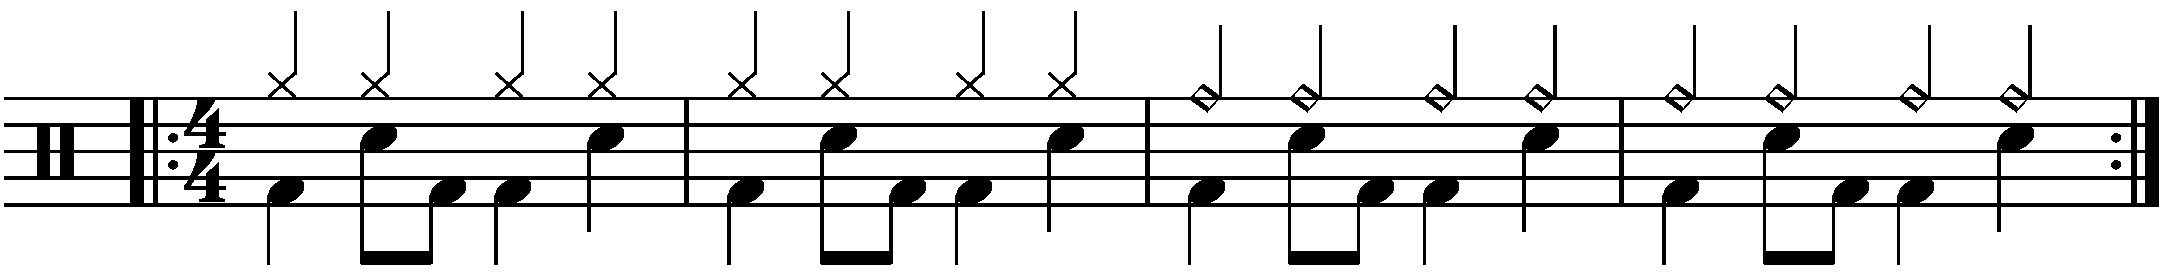 Rhythm of the first groove